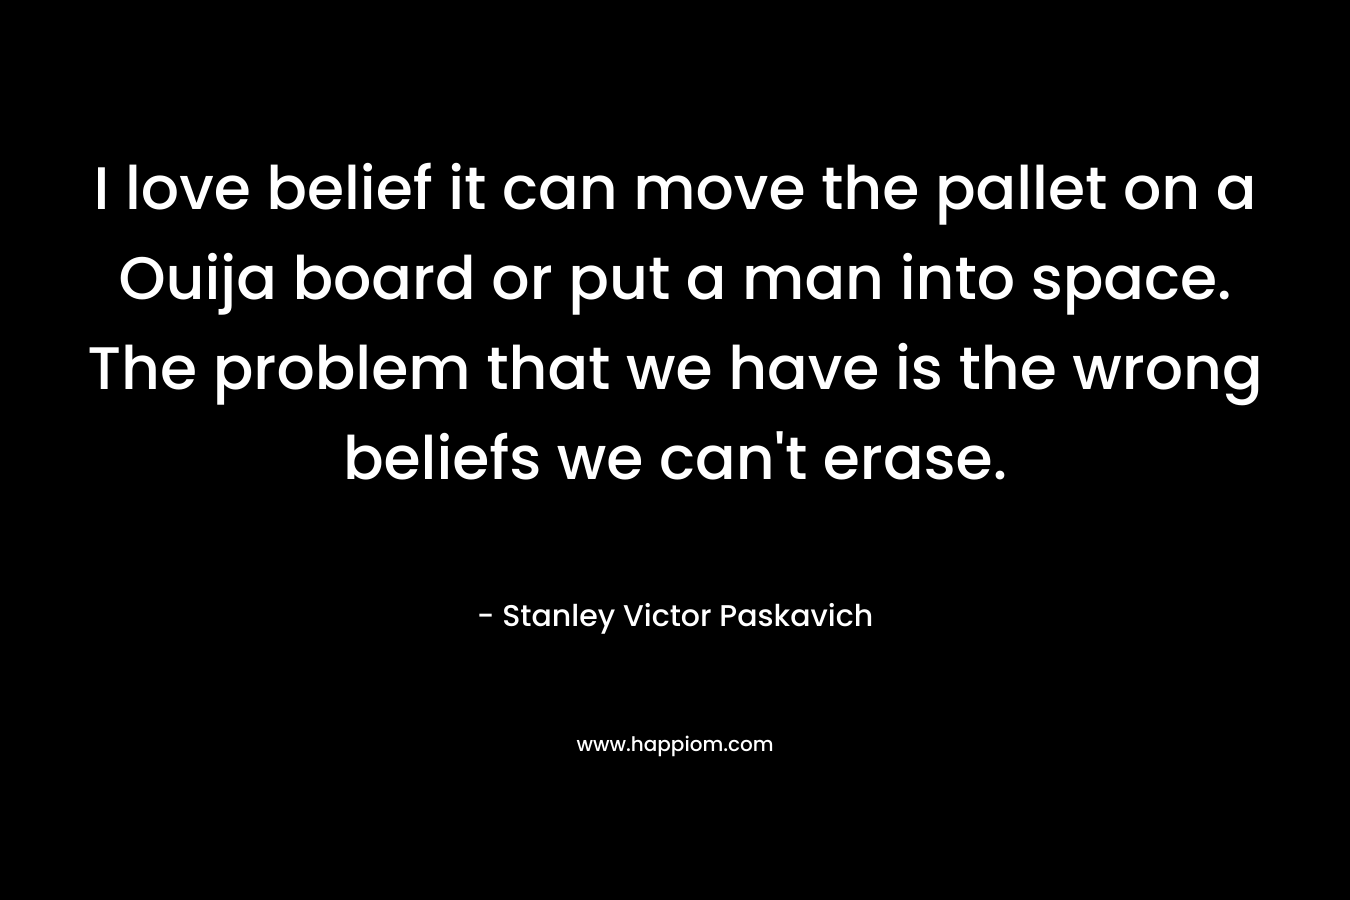 I love belief it can move the pallet on a Ouija board or put a man into space. The problem that we have is the wrong beliefs we can’t erase. – Stanley Victor Paskavich